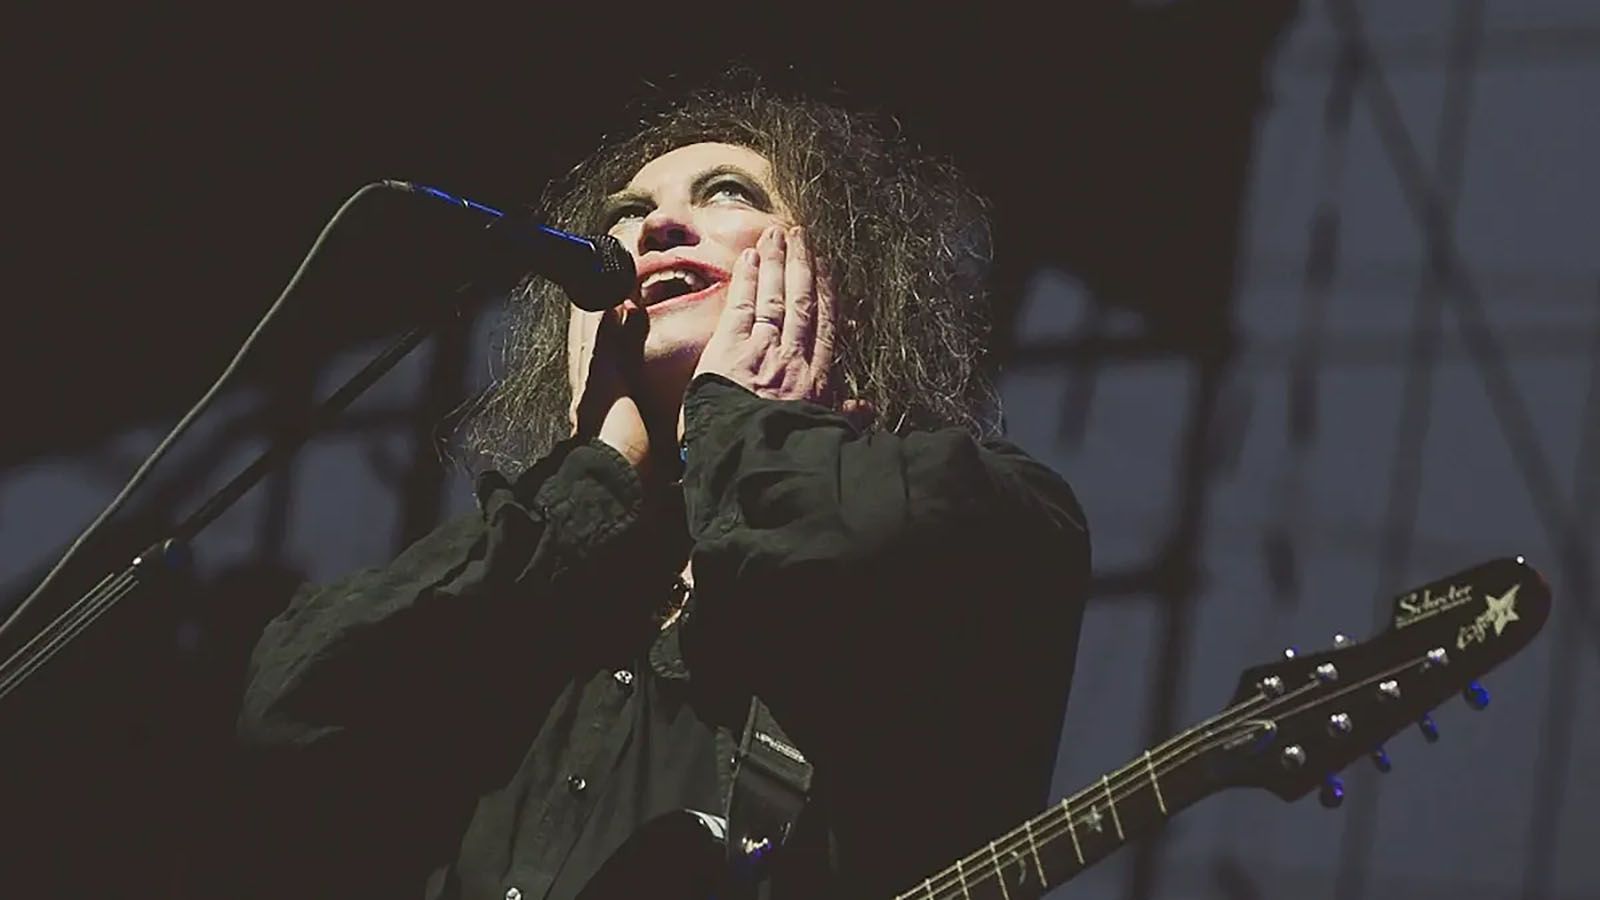 After seven years, The Cure are heading back out on tour.